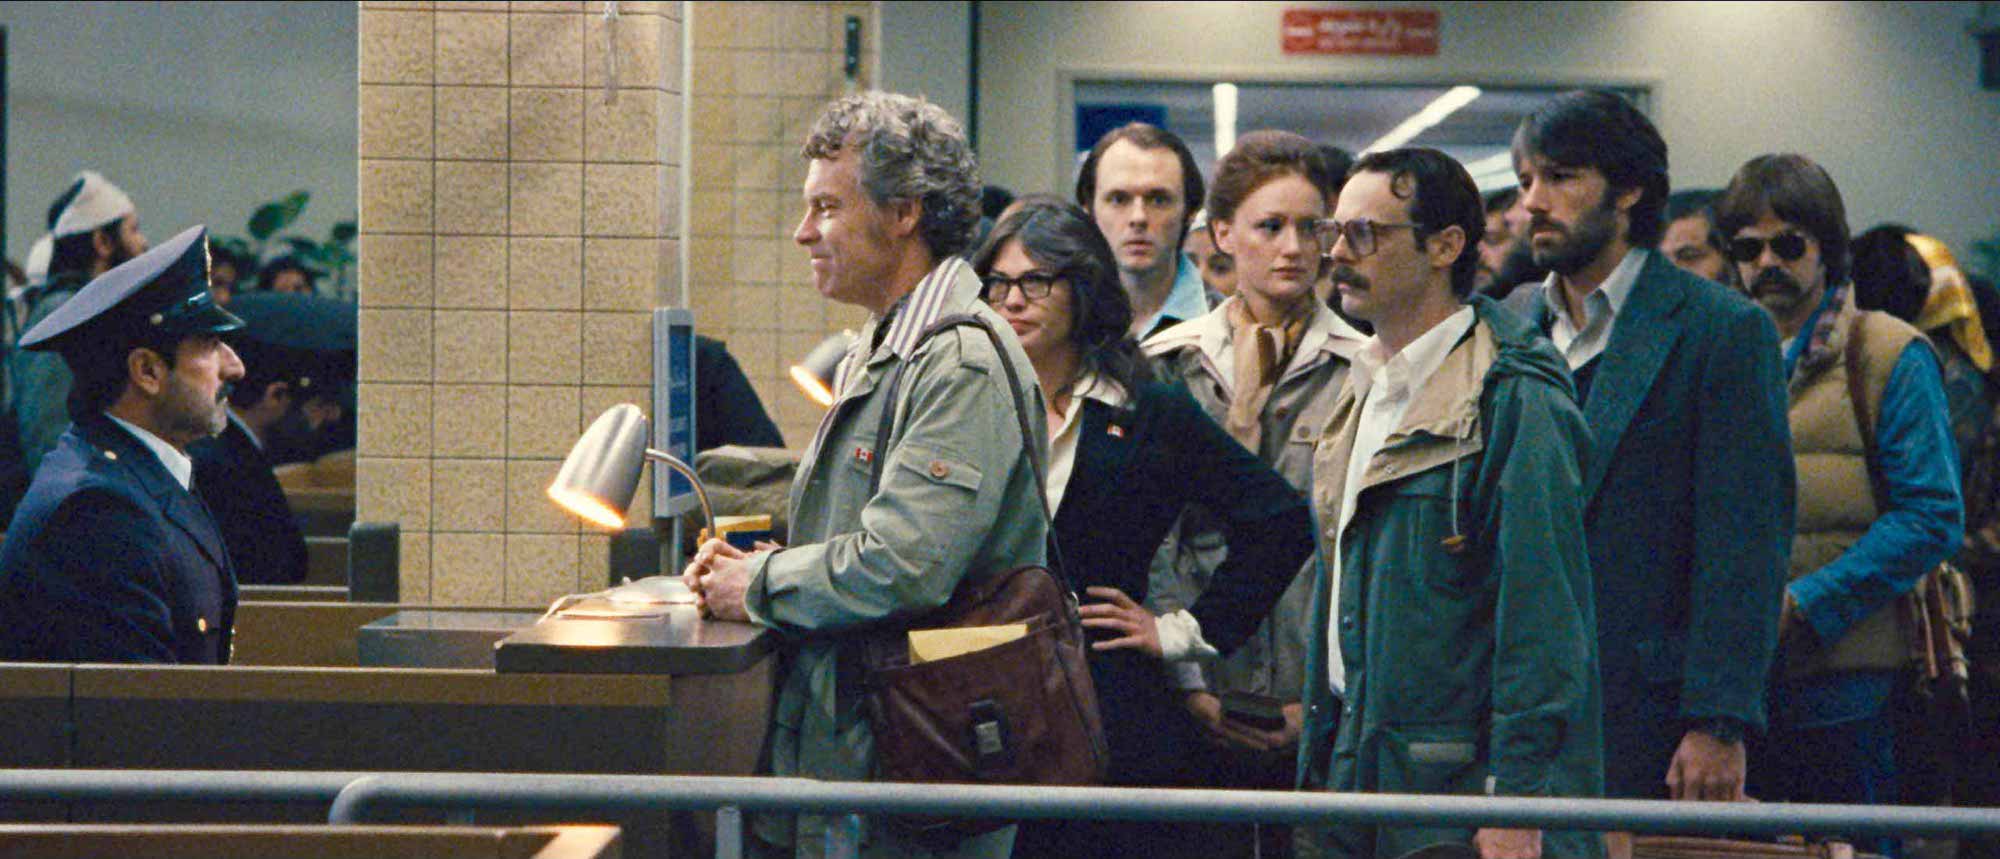 Tate Donovan, Clea DuVal, Tate Donovan and Ben Affleck in Warner Bros. Pictures' Argo (2012)